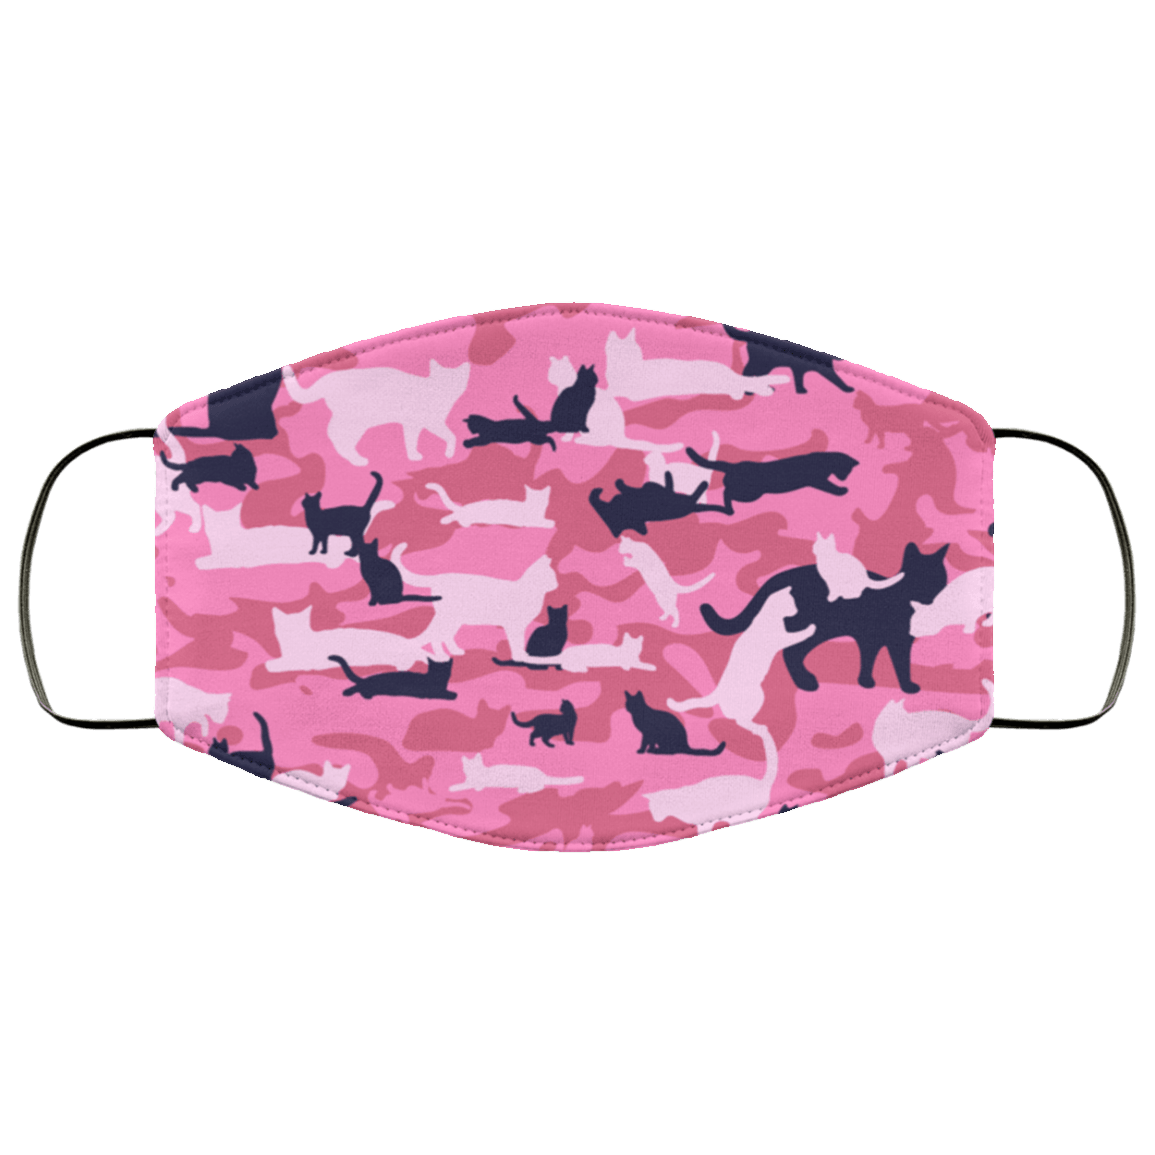 Designs by MyUtopia Shout Out:Pink Camo Cat Print Adult Fabric Face Mask with Elastic Ear Loops,3 Layer Fabric Face Mask / Pink / Adult,Fabric Face Mask